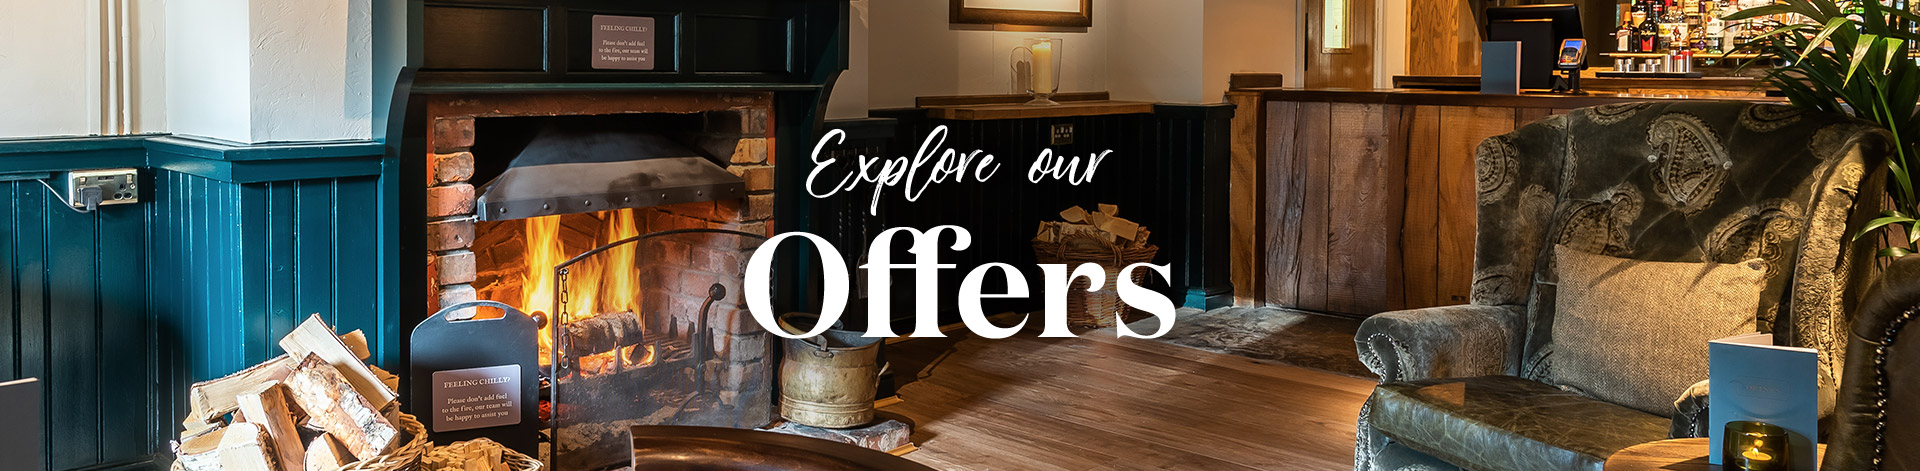 Our latest offers at The Old Gate Inn